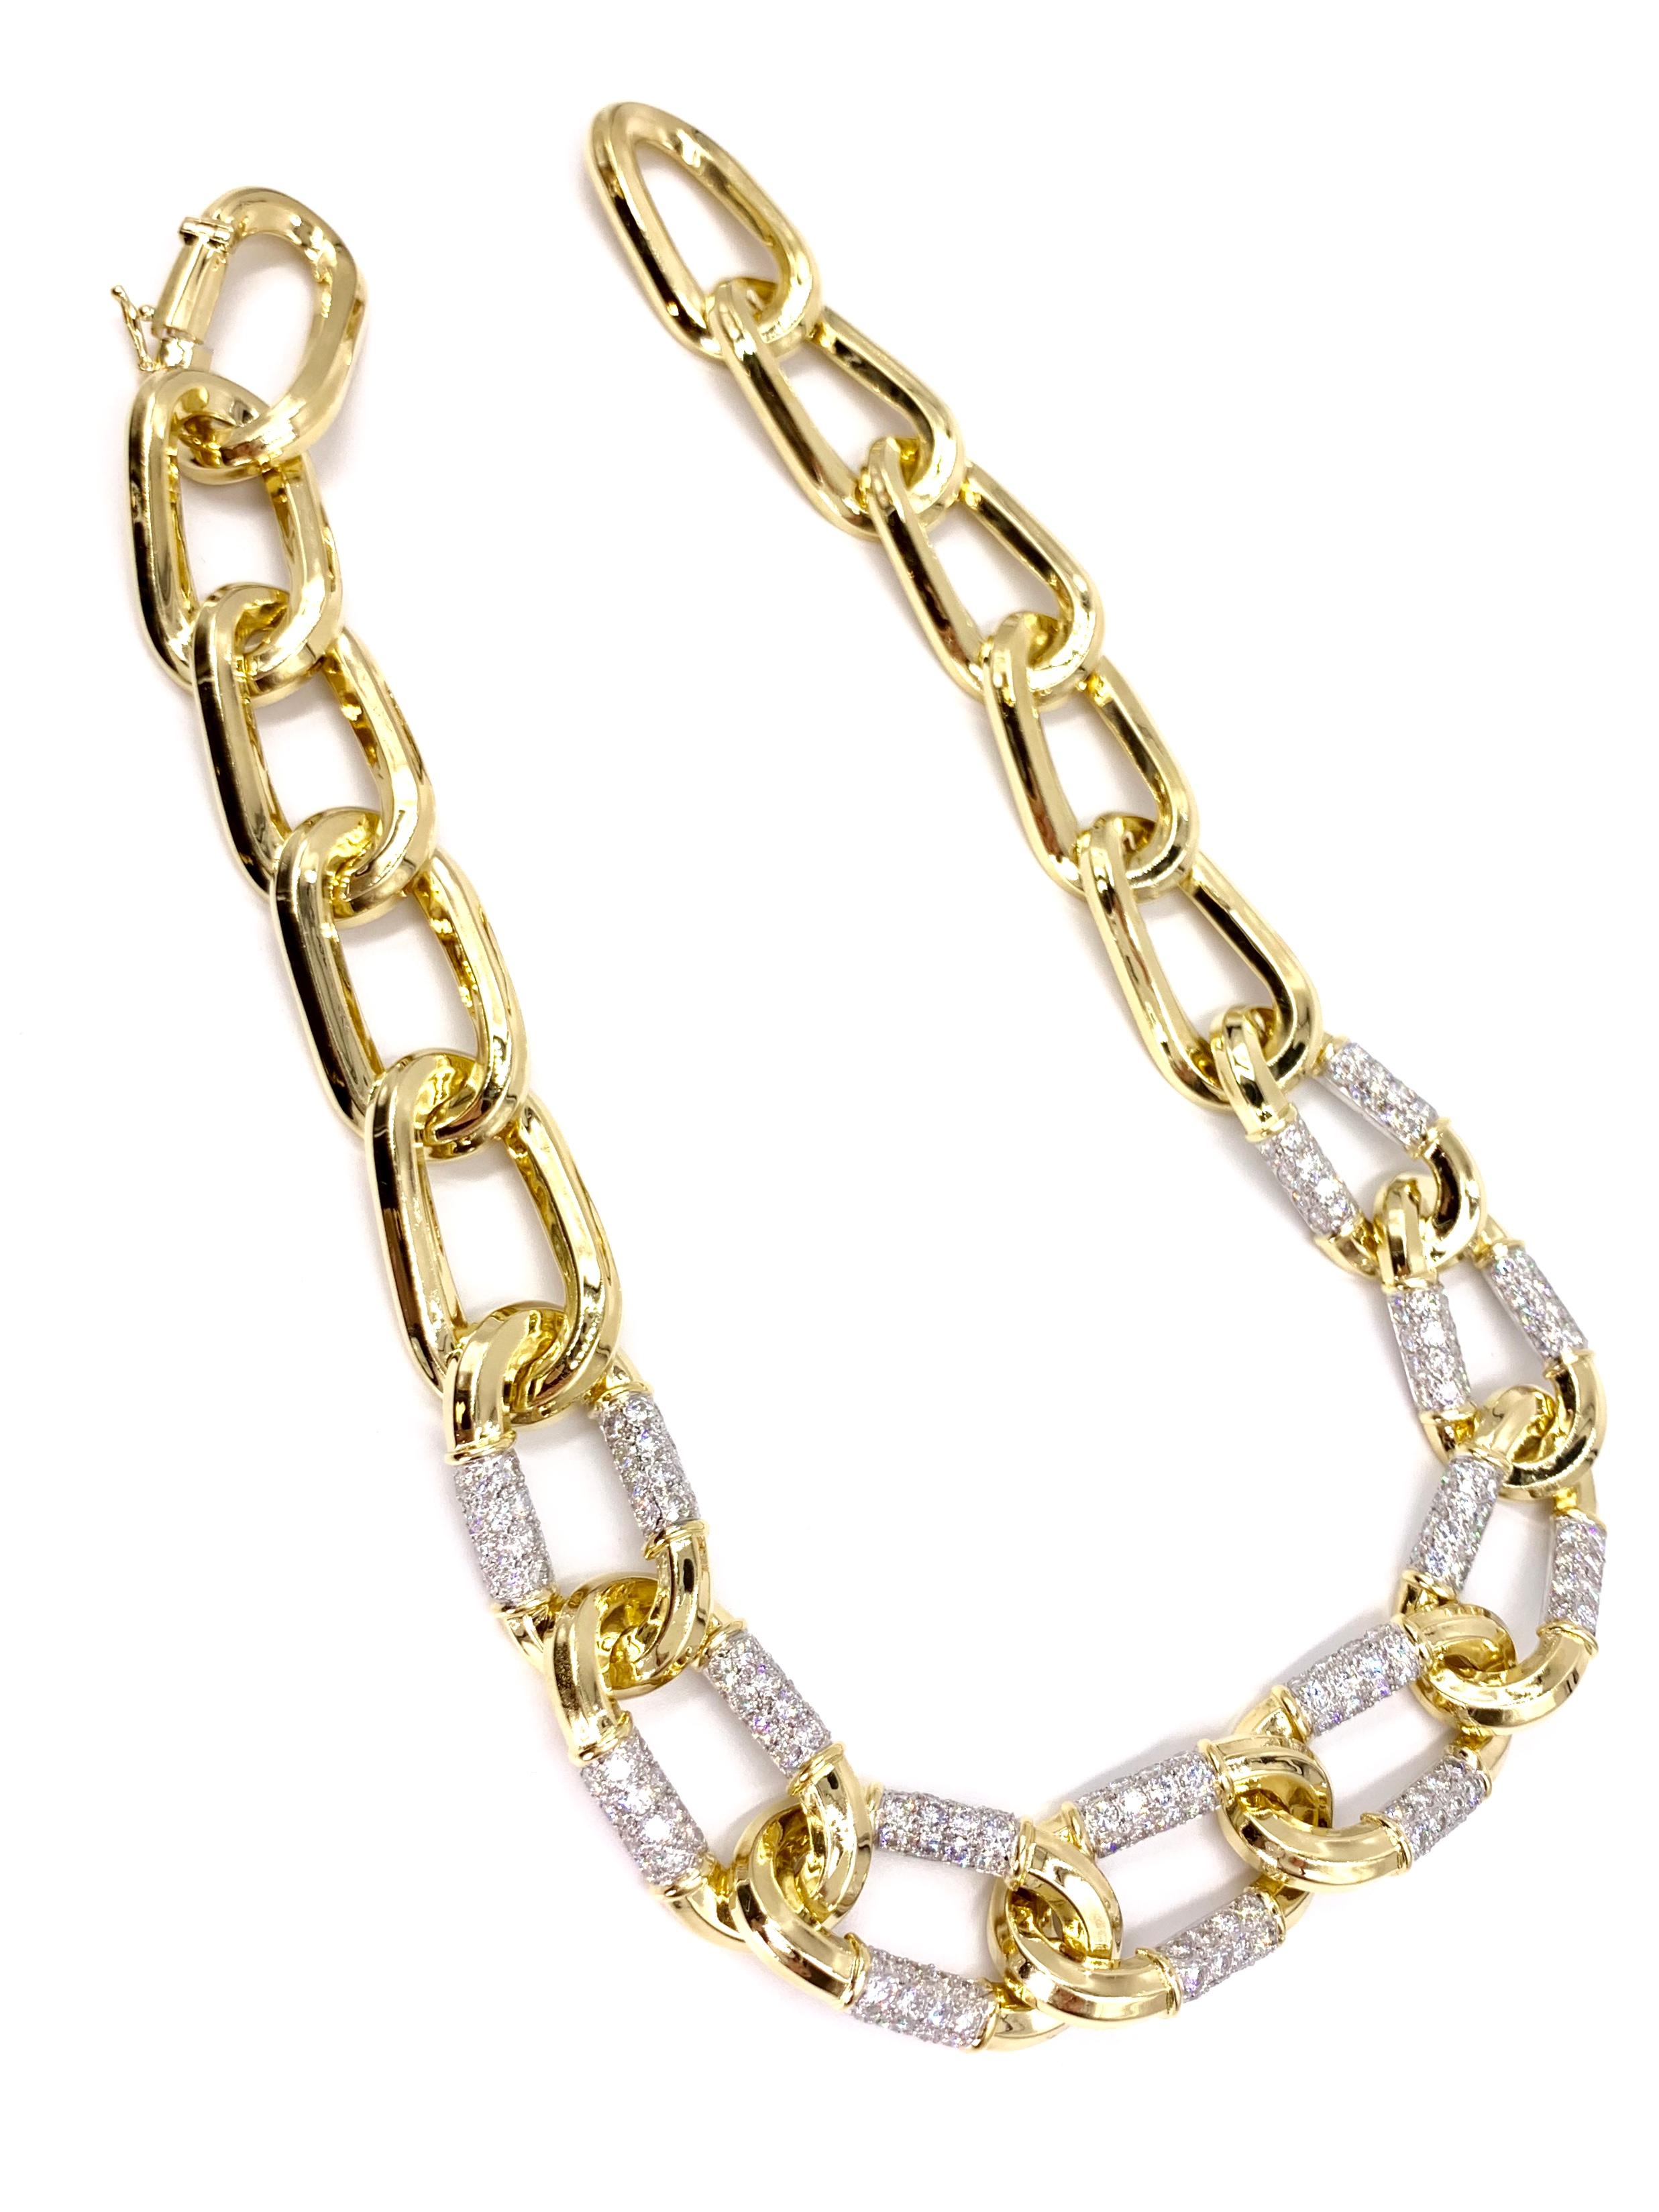 Contemporary 18 Karat and Platinum Charles Turi Large Oval Link Necklace with Diamonds For Sale